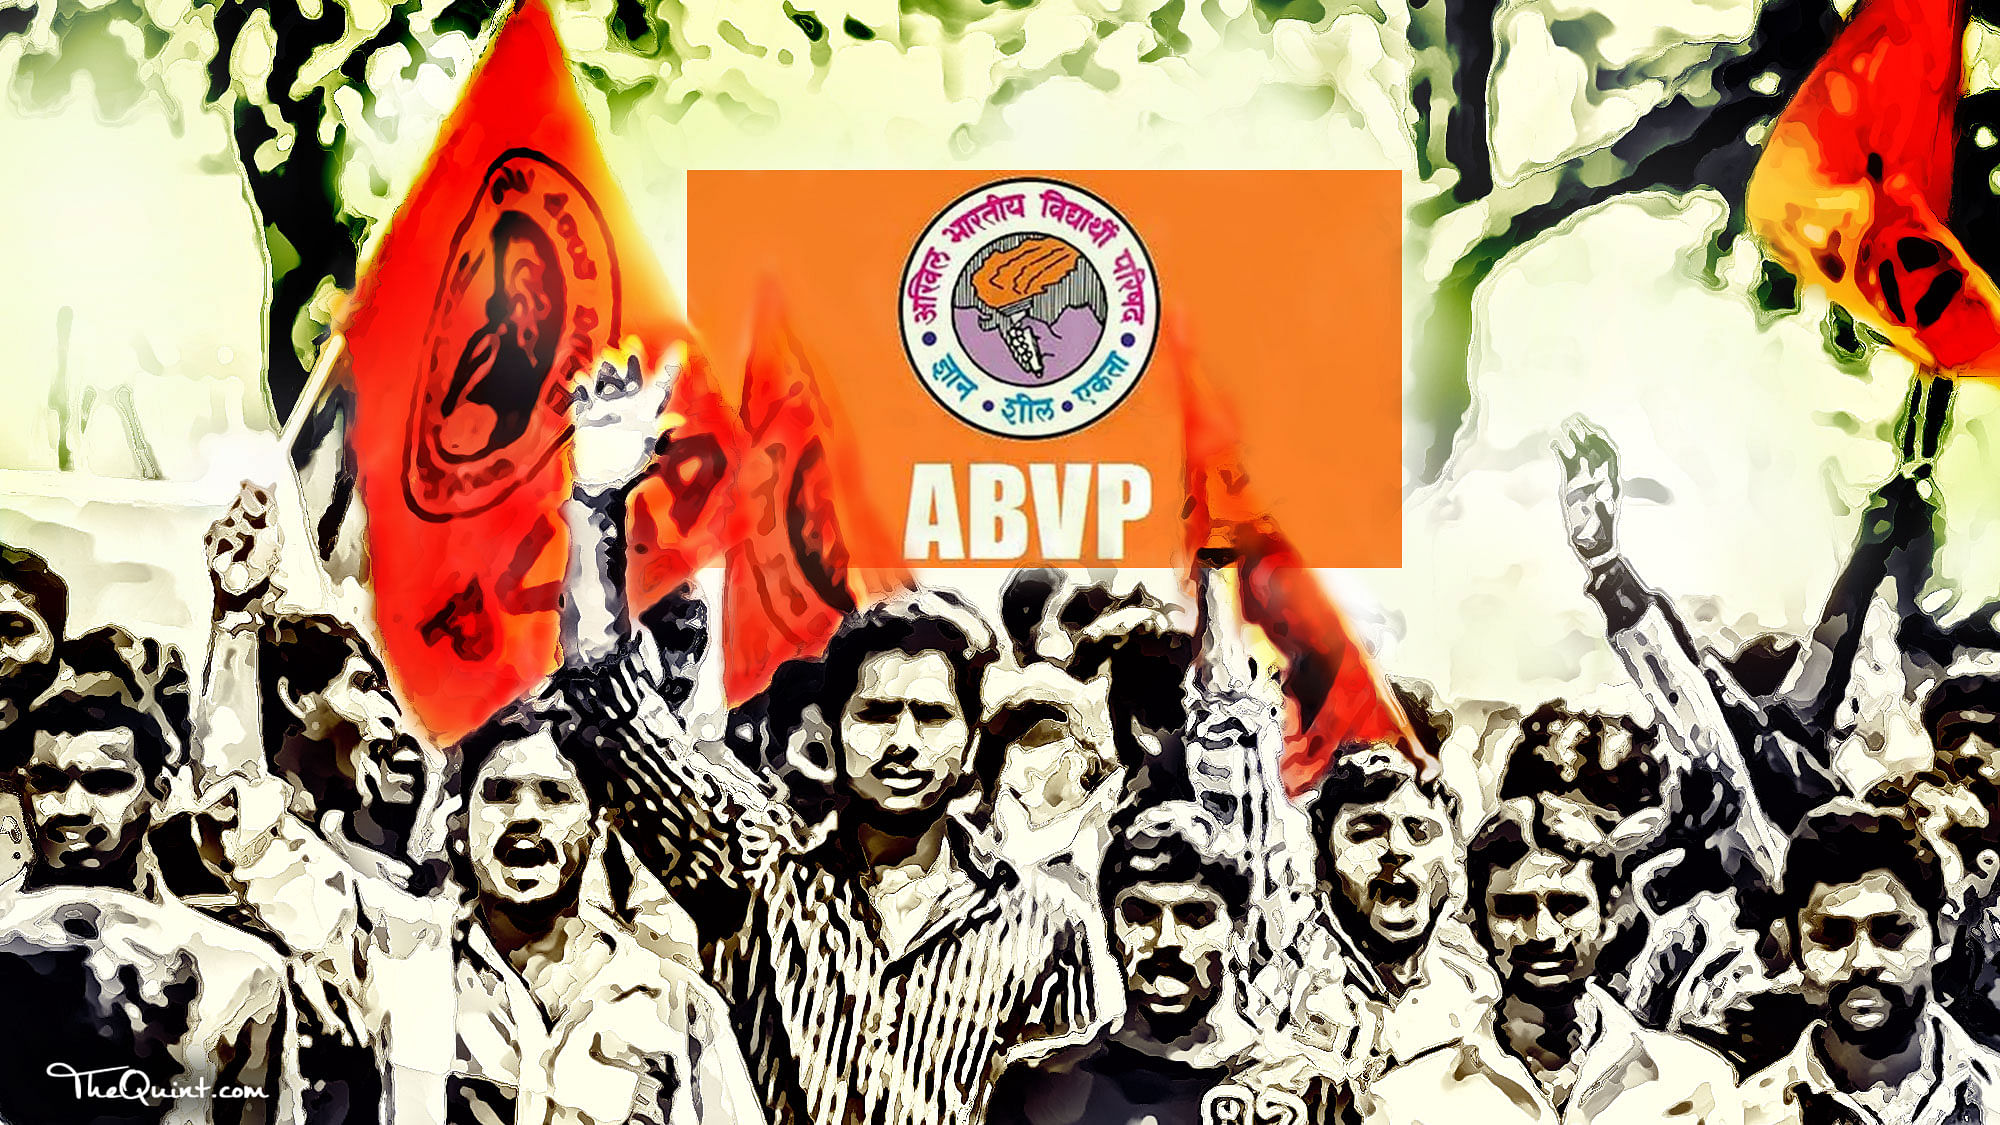 Ramjas Not Alone, ABVP Has a Legacy of Violence and Vandalism